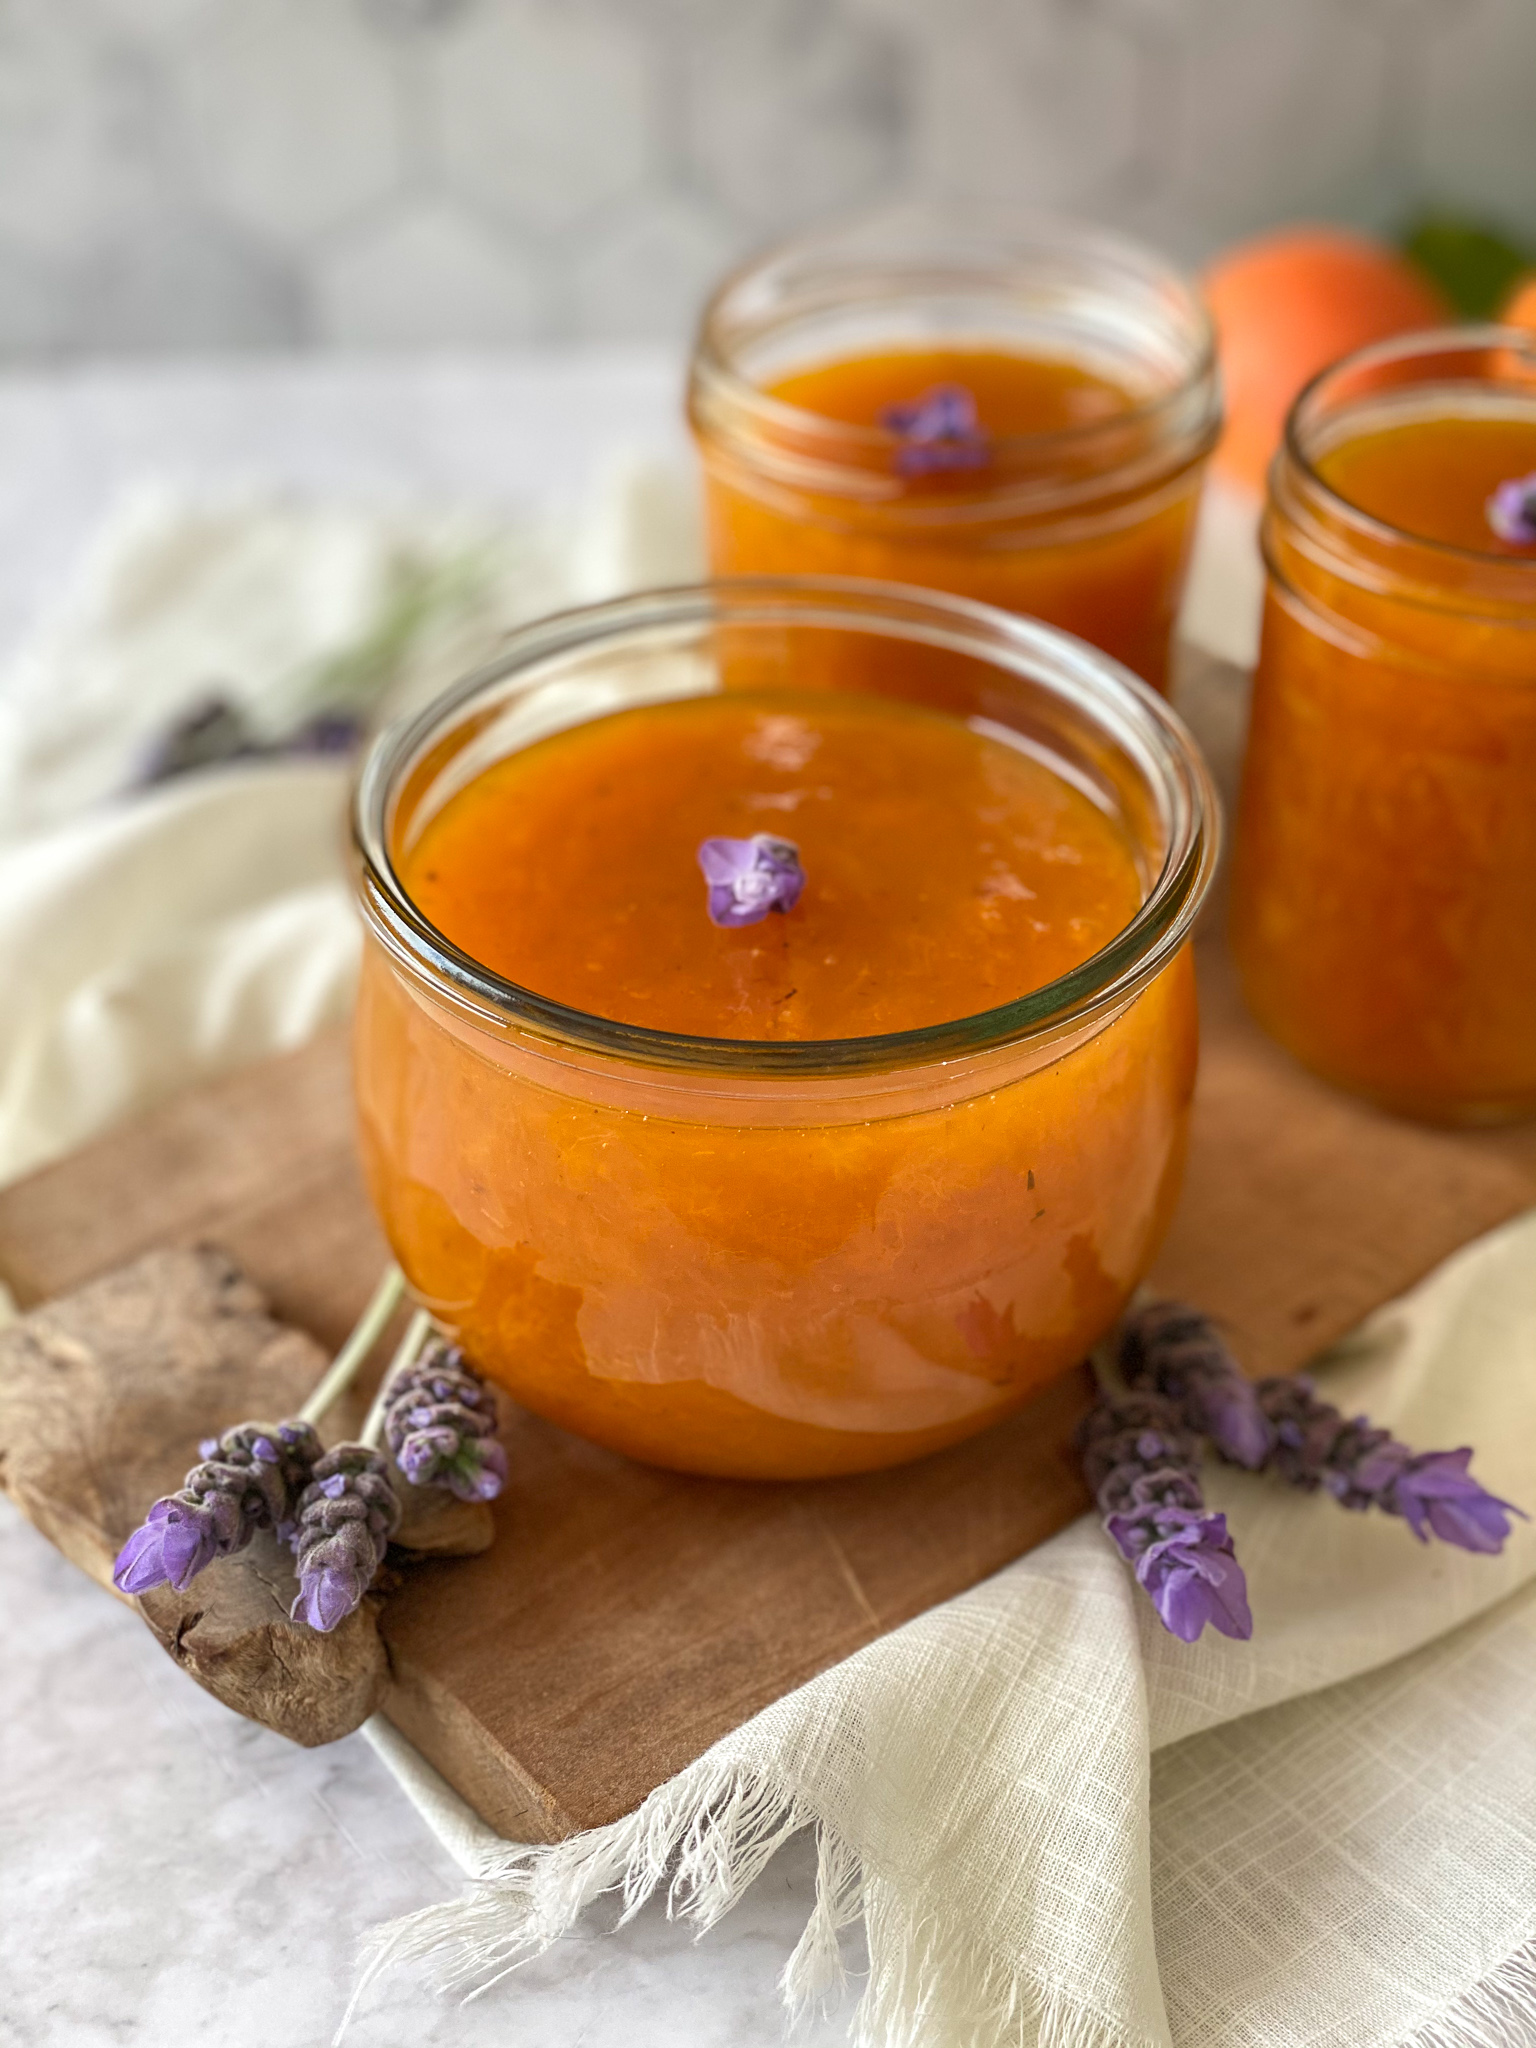 A Unique and Delicious Recipe for Apricot Jam flavored with a touch of lavender sugar and topped with fresh lavender blossoms